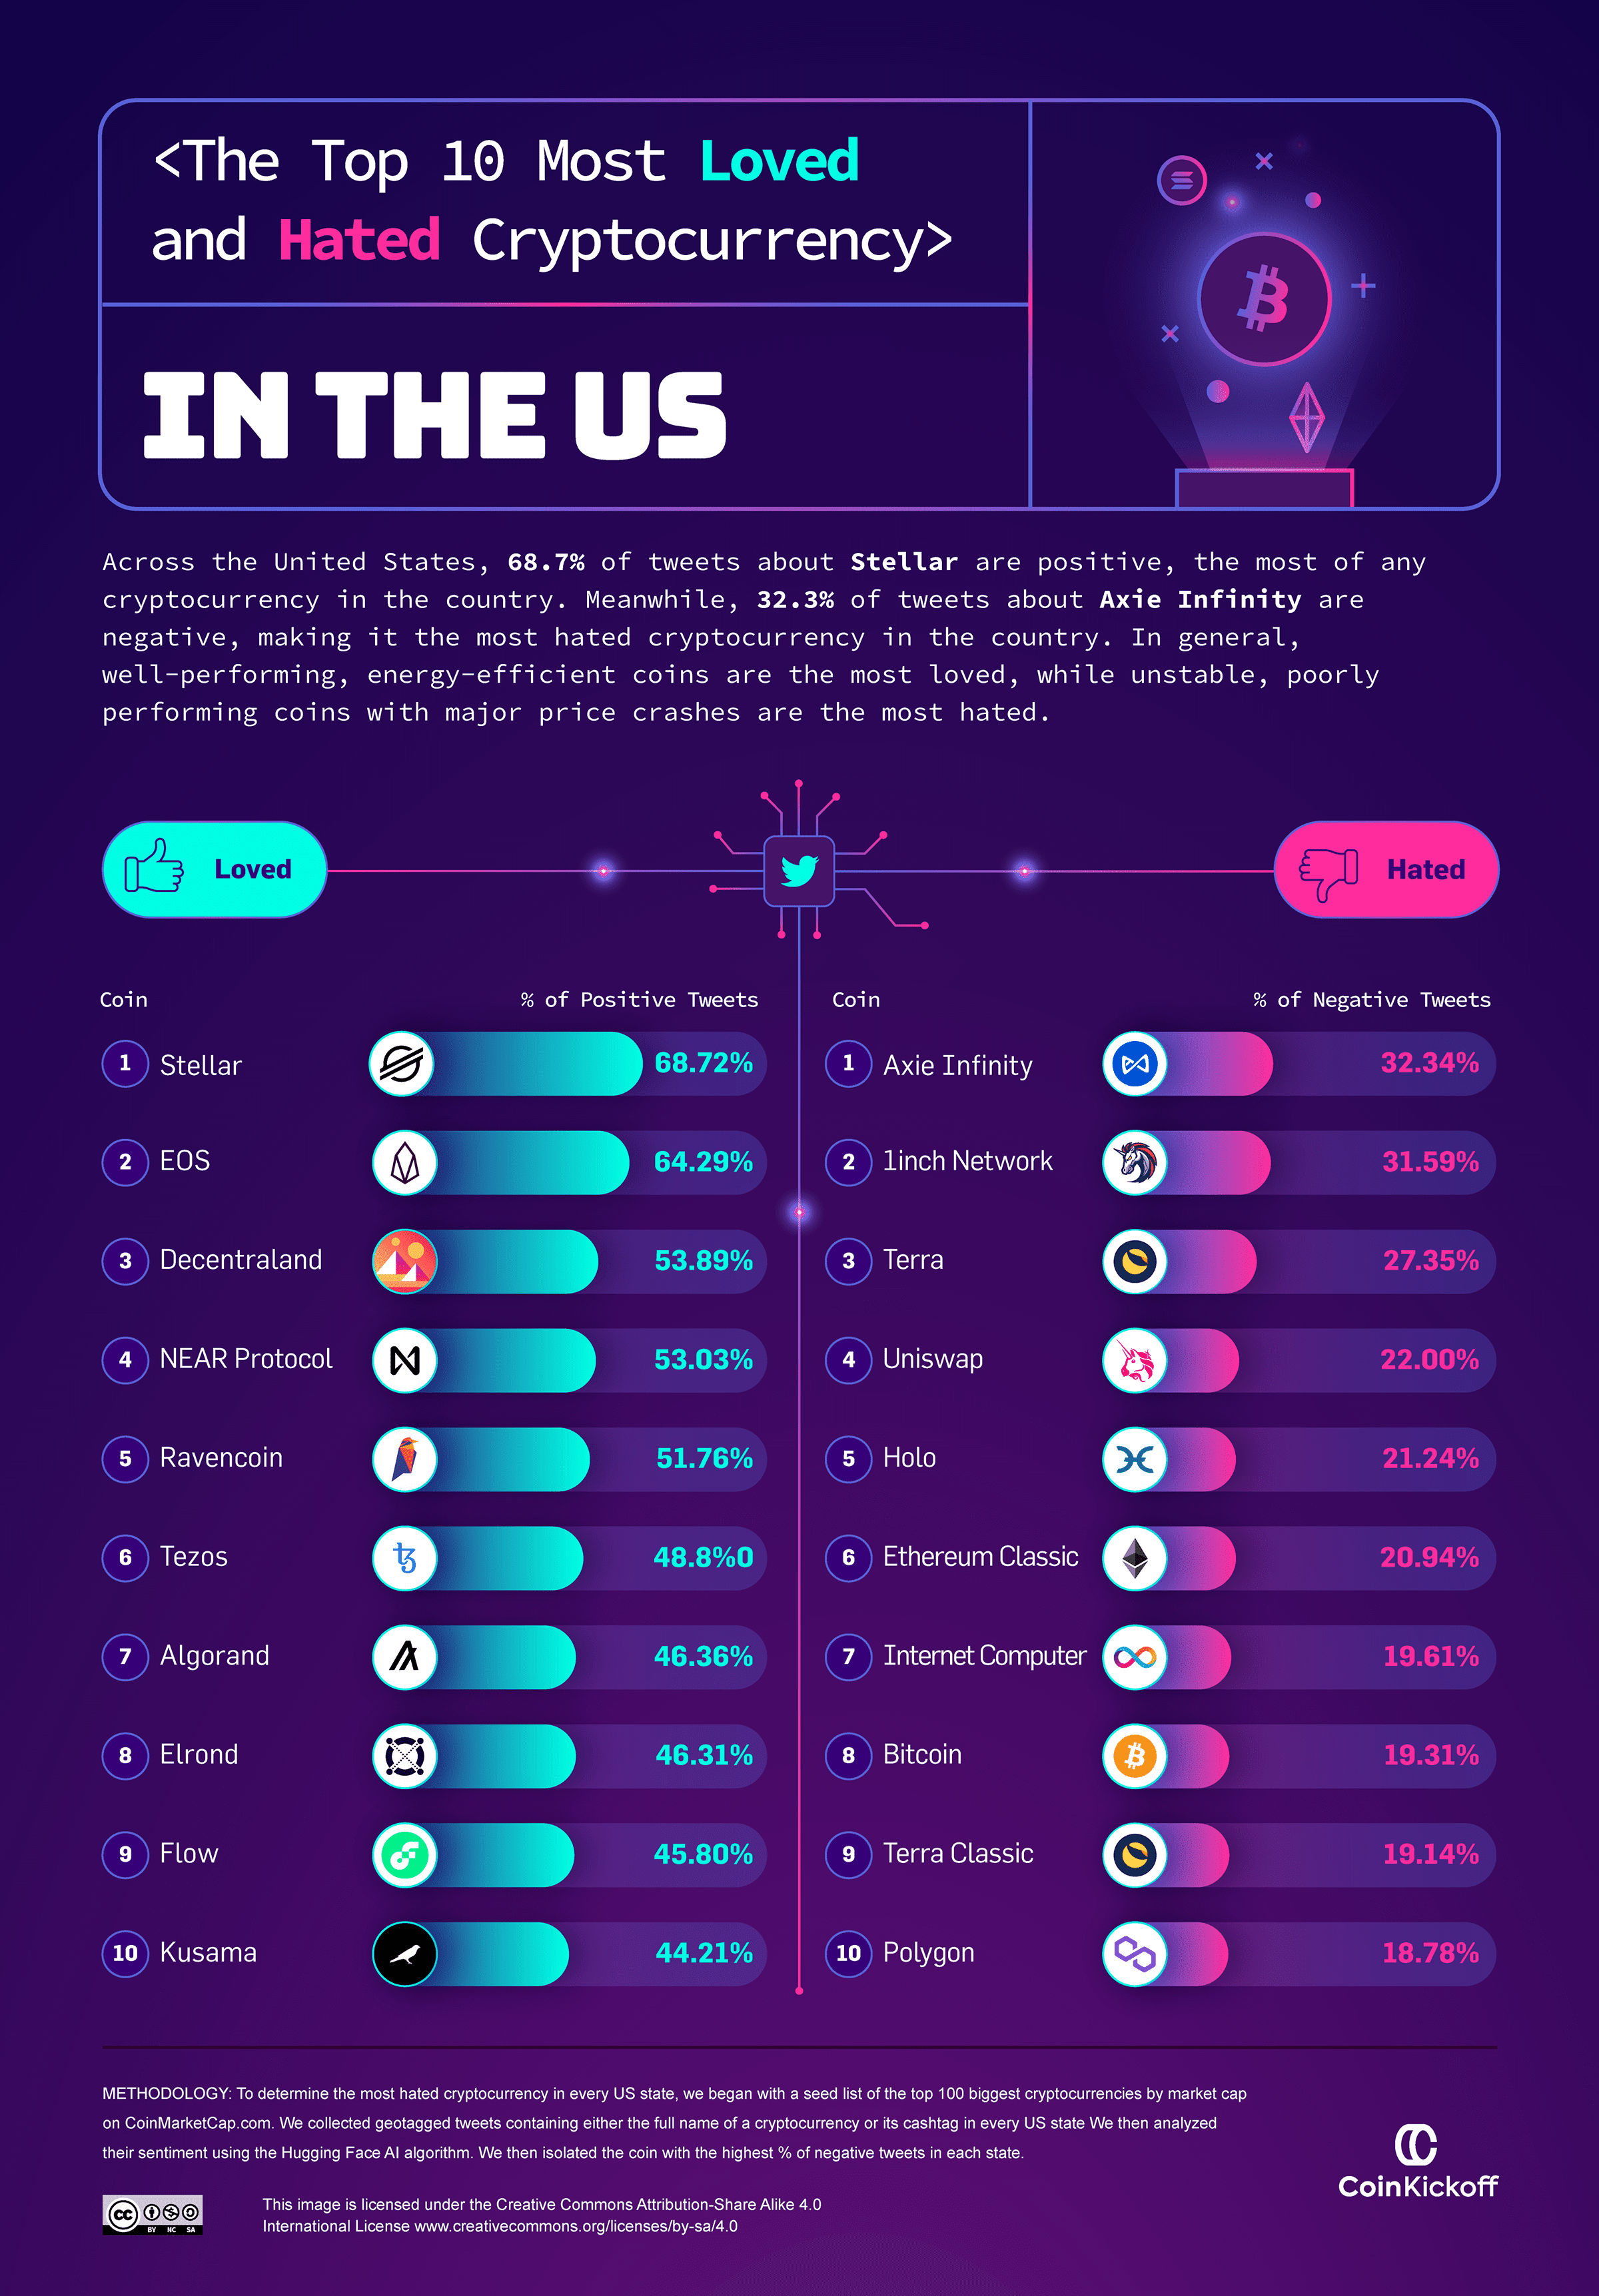 06 Top 10 Most Loved and Hated Cryptocurrency in the US